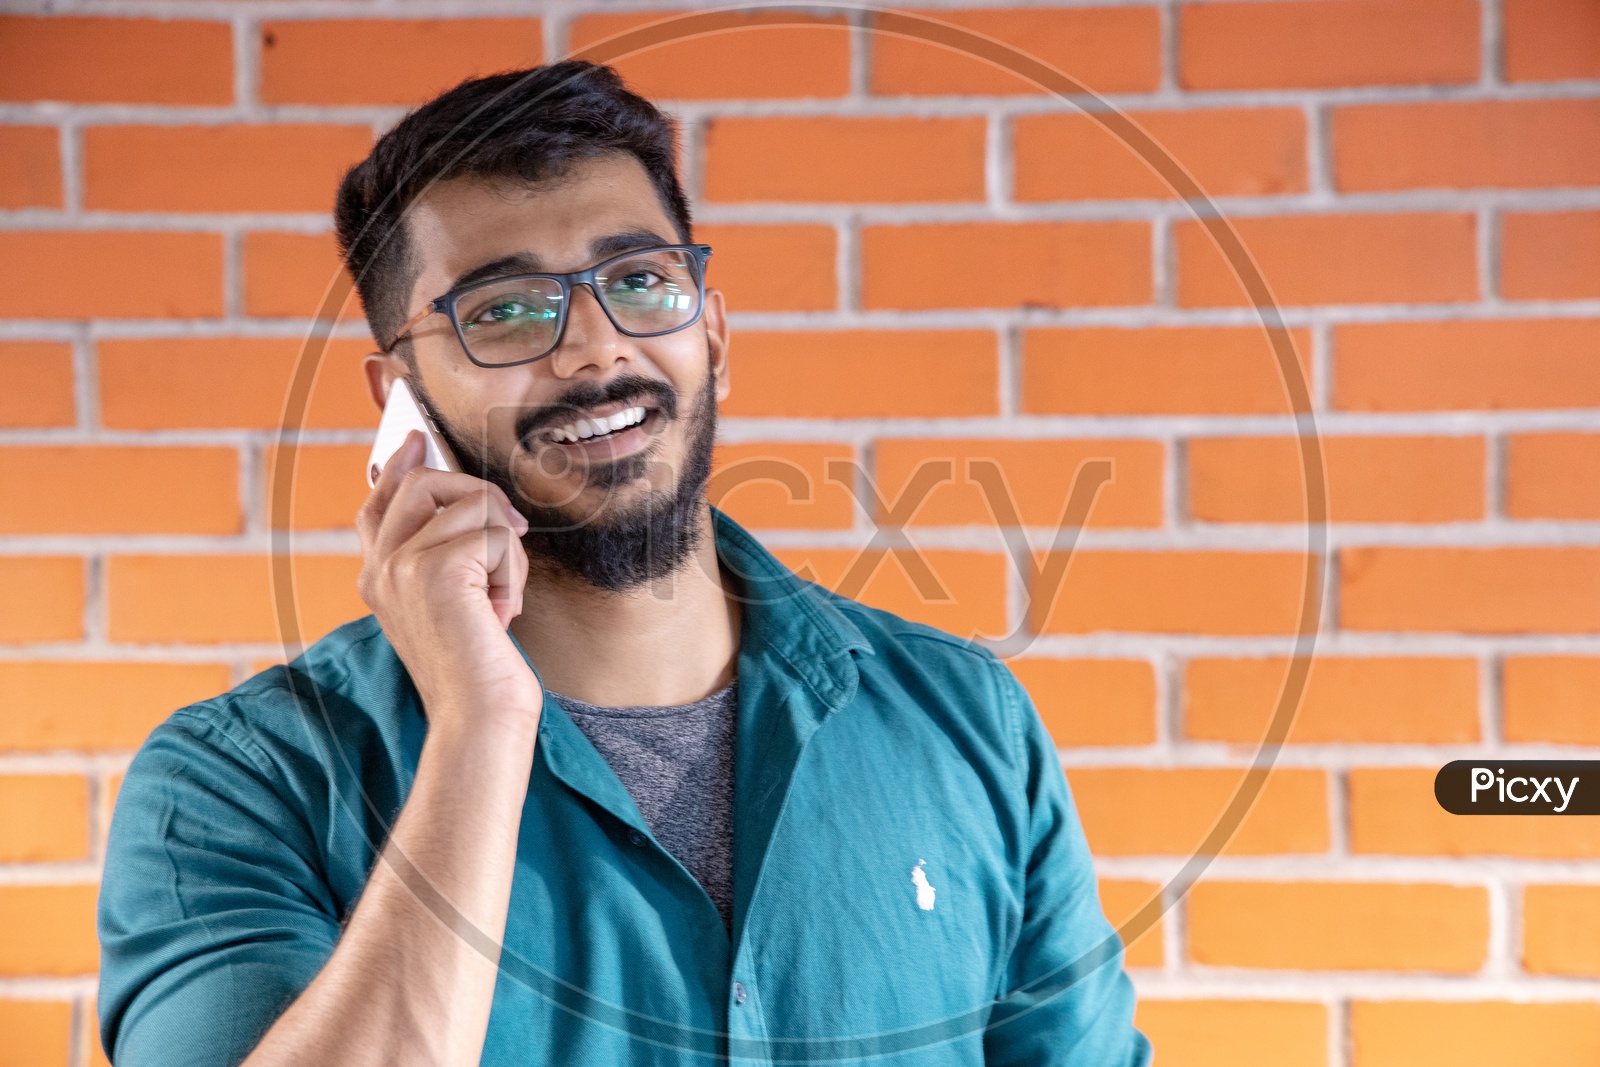 Young Man Or  Student  Speaking Or Talking In Smartphone or Mobile With a Smile Face  Over  A Brick wall  Background